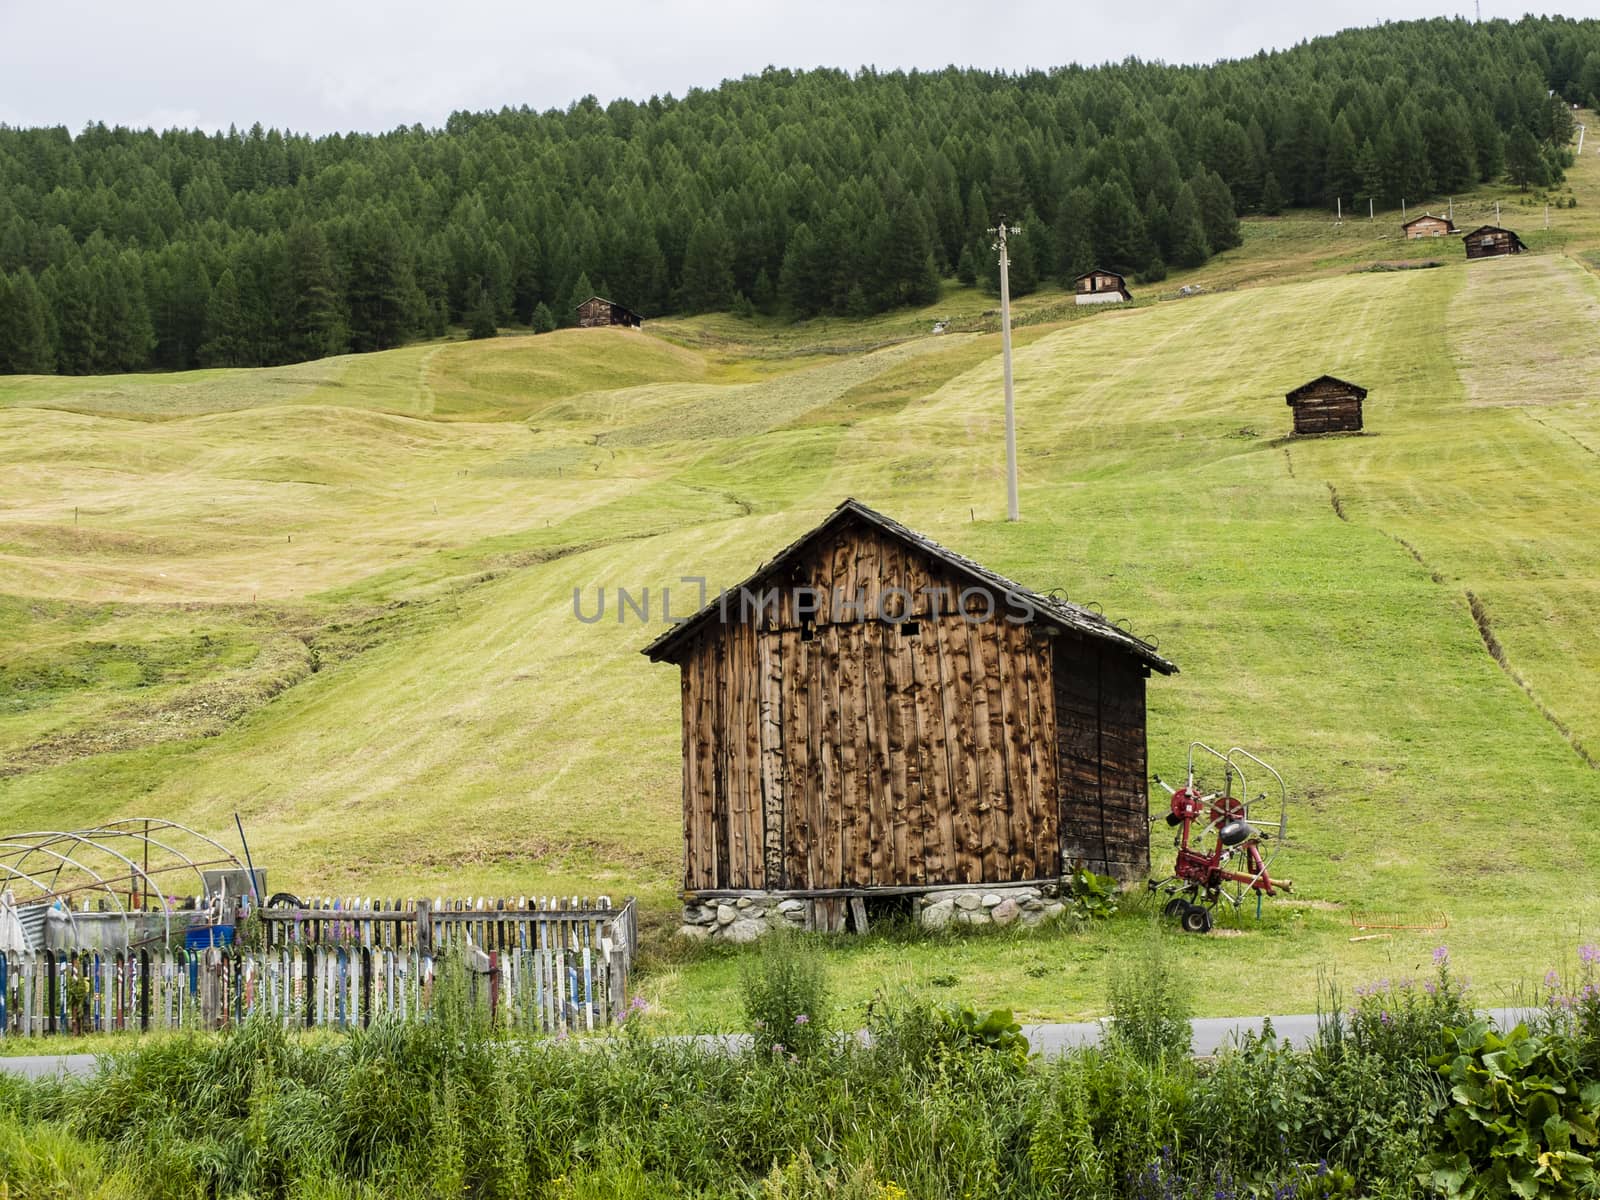 Italy, Lombardy, Livigno, alpine mountain landscape in summer with flowery meadows and with wooden huts, traditional alpine constructions